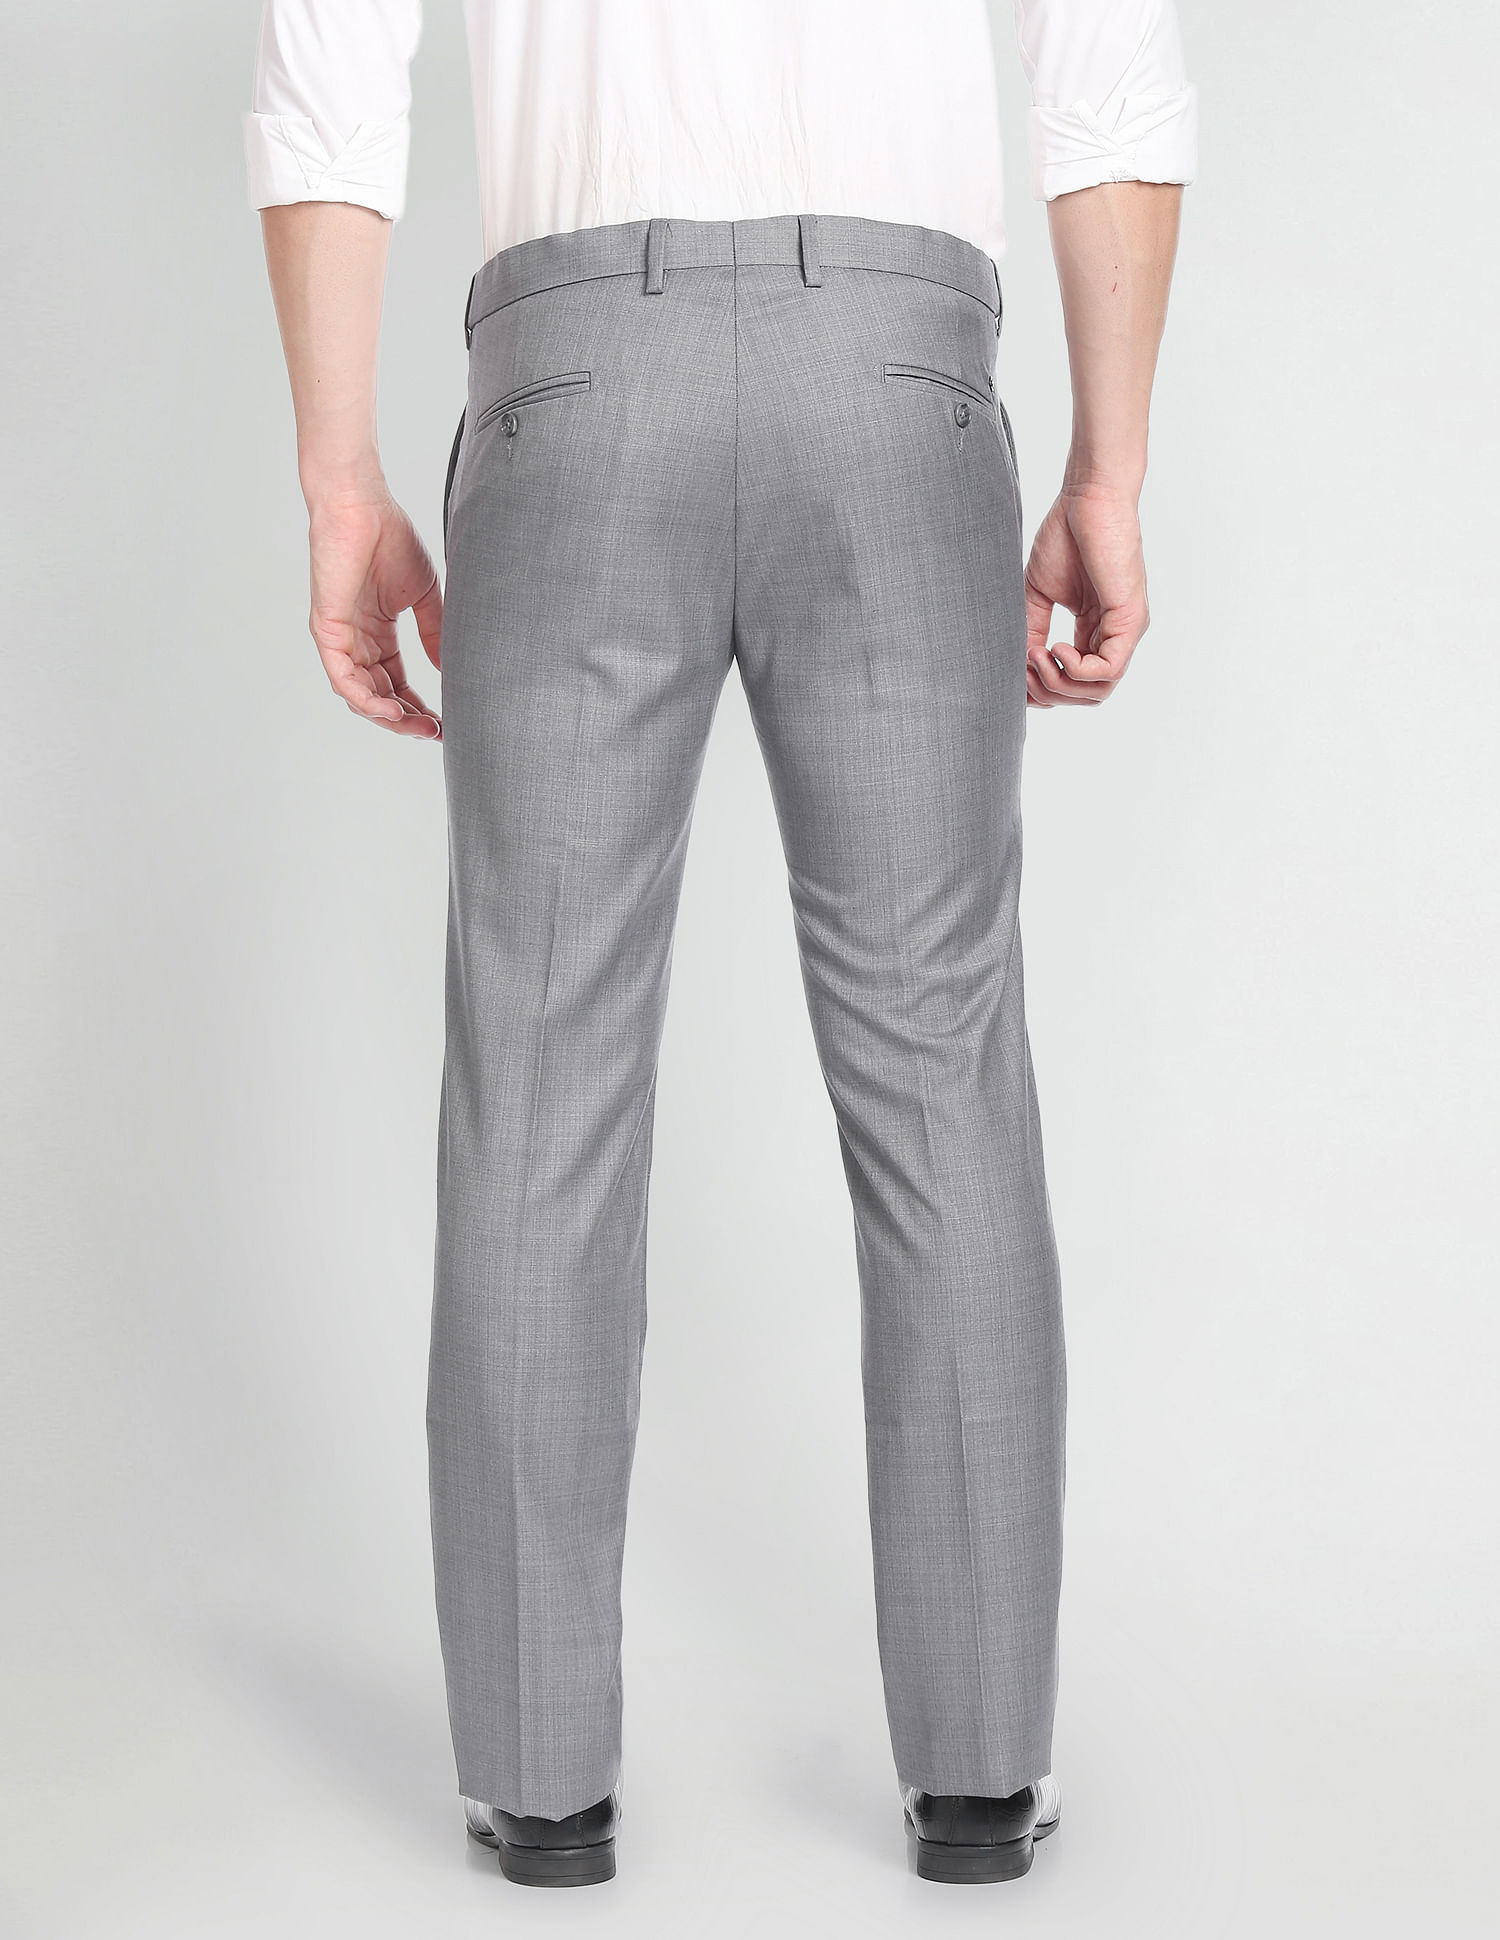 GALLERY DEPT. Slim-Fit Flared Cotton-Twill Trousers for Men | Slim fit,  Cotton twill, Slim fit pants